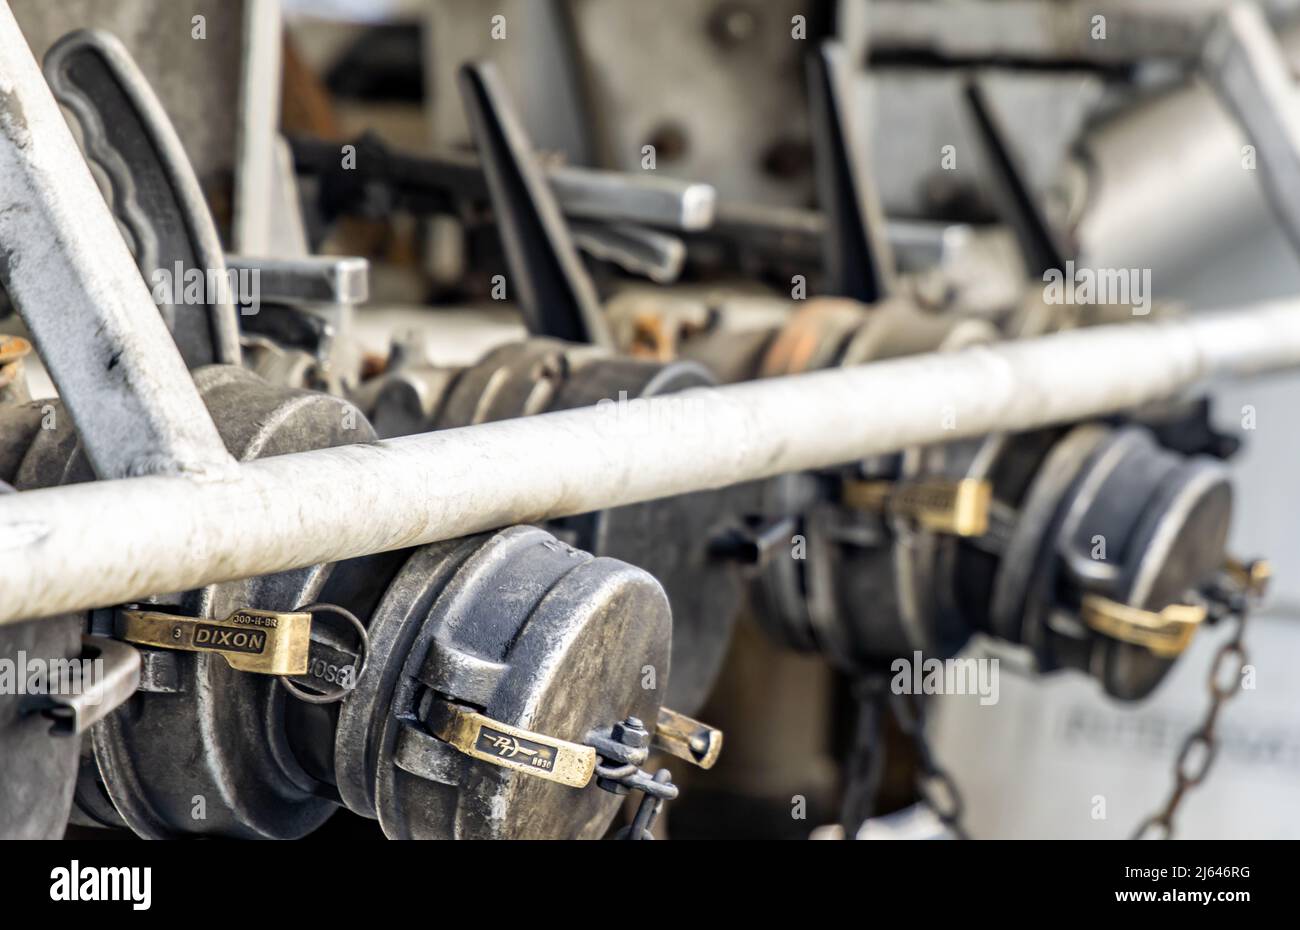 Detail images of valves on a tanker truck Stock Photo